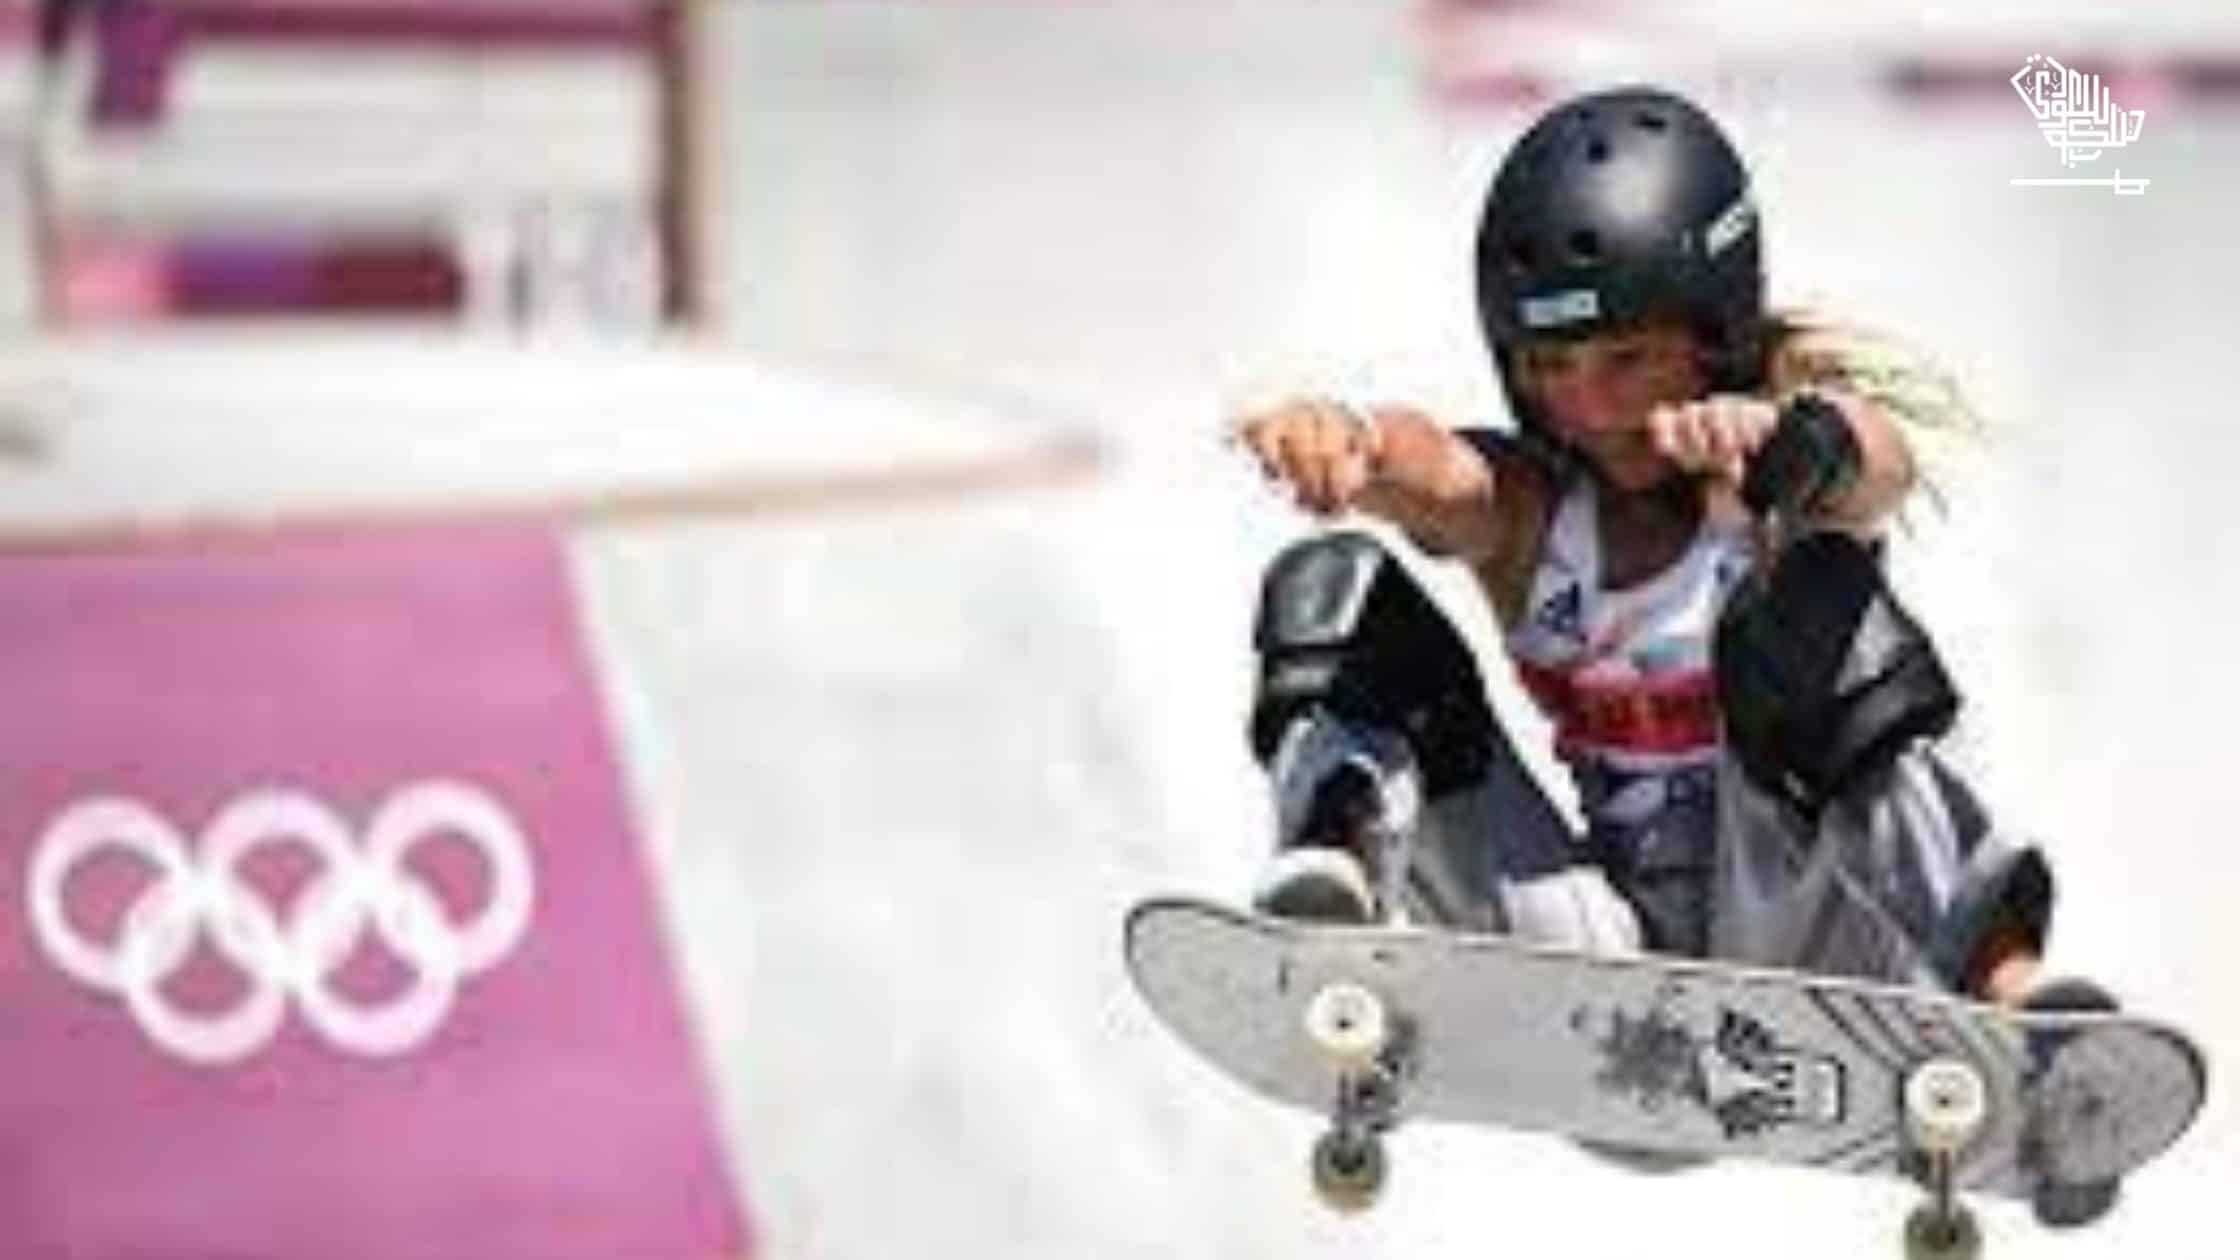 13-year-old Sky Brown makes history by taking home Bronze for skateboarding in the Tokyo Games